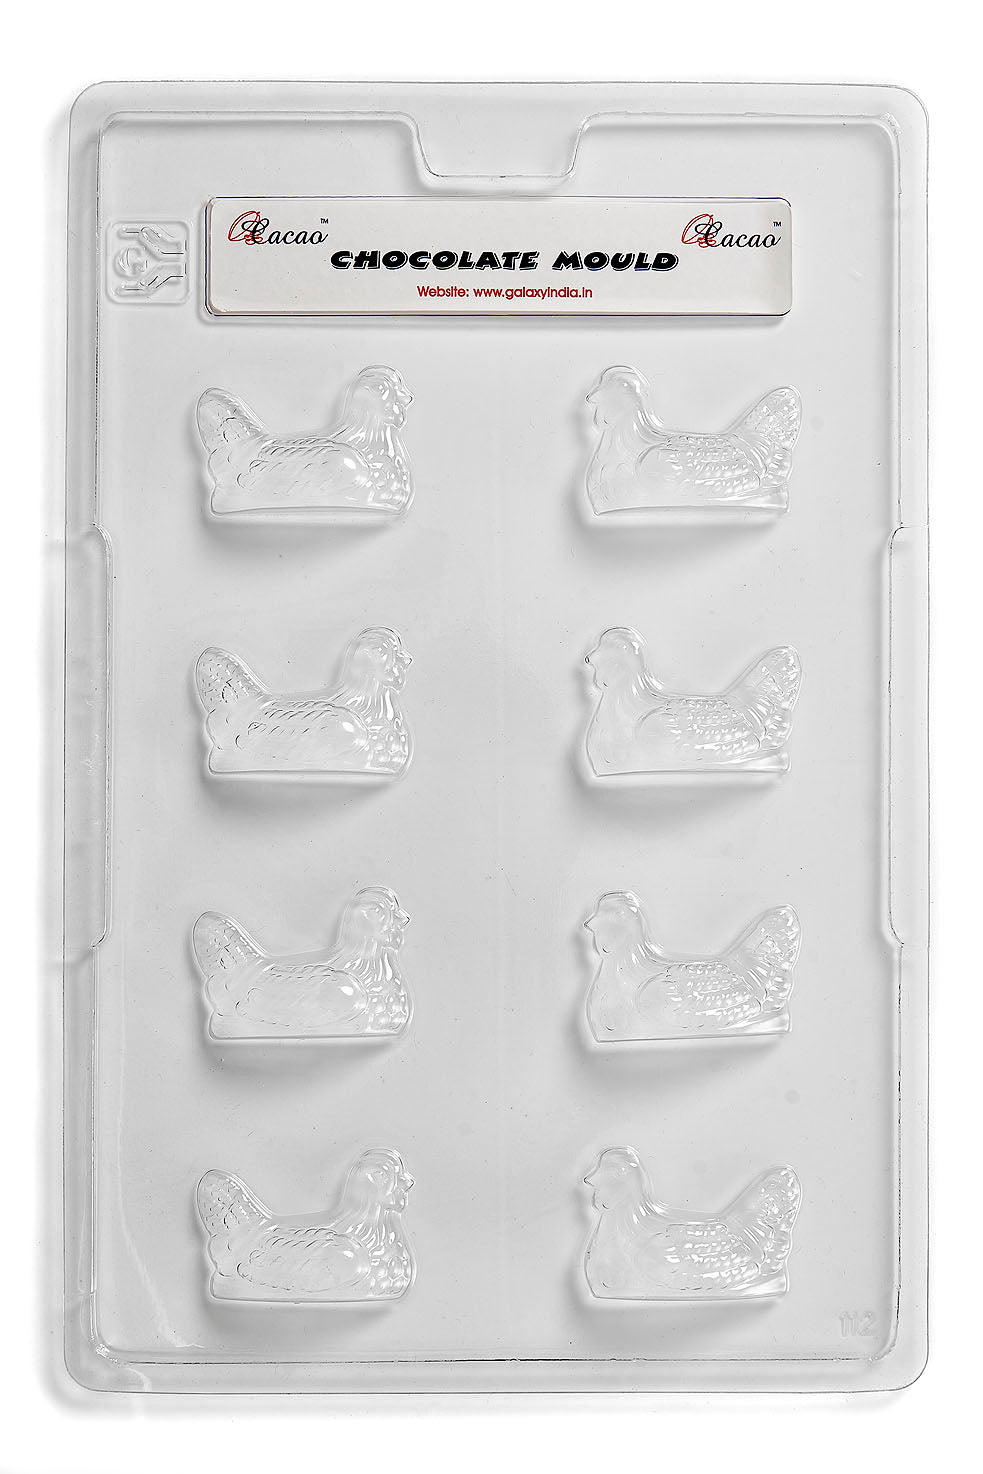 Chickens (Two Make A Whole) Chocolate/Sweet/Soap/Plaster/Bath Bomb PVC Mould (8 cavity)